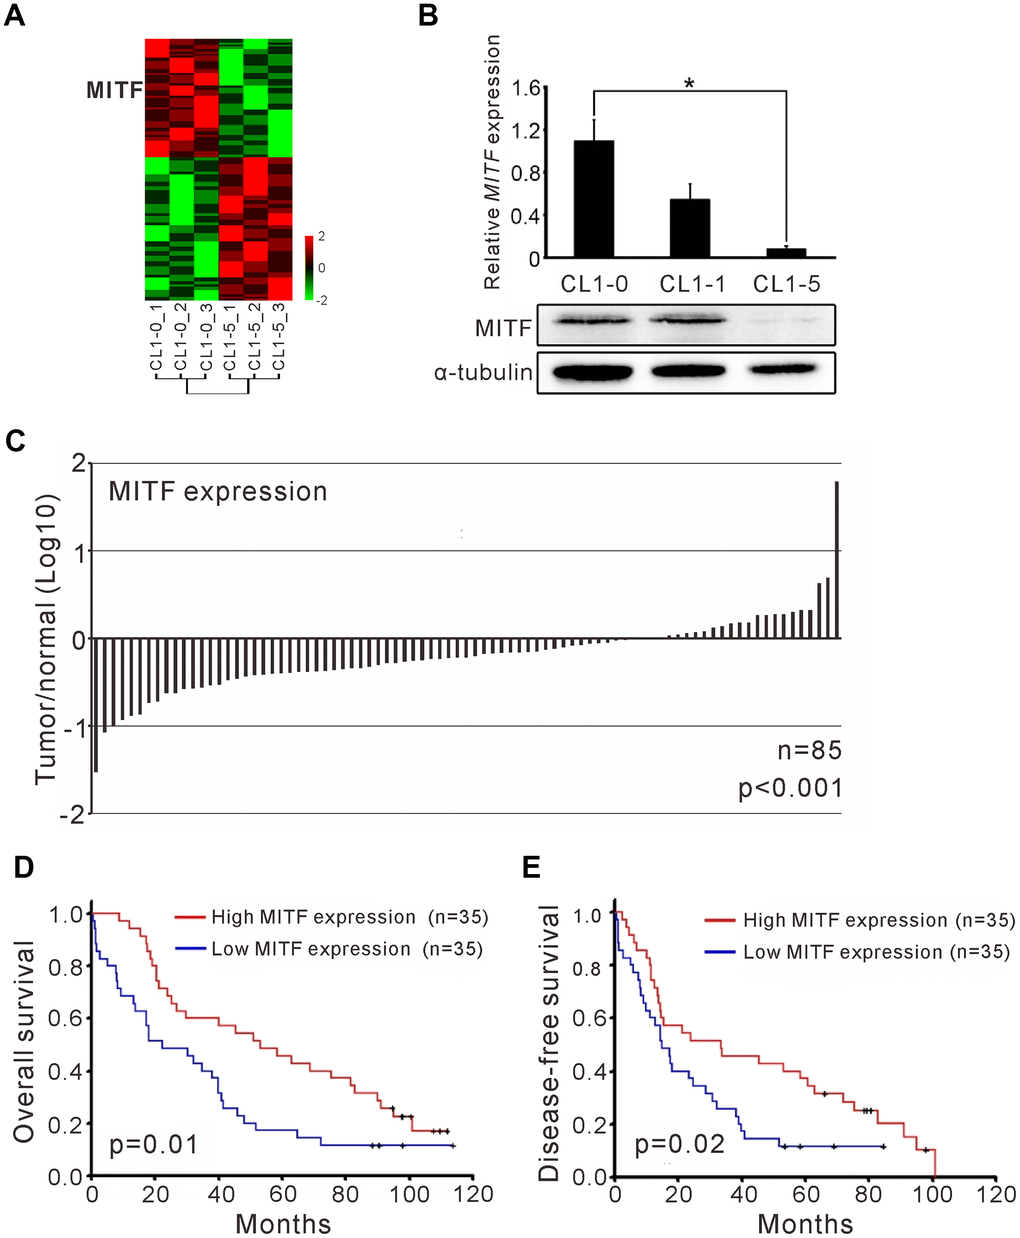 The MITF expression associated with cancer invasiveness and better outcome of NSCLC patients. (A) Heatmap of the gene expression profiles in CL1-0 and CL1-5 were presented. Each cell line was analyzed for three replicates and the significant microarray probes with 5-fold change were applied. MITF was one of the significant expressed genes. The scale was used the z-score. (B) MITF mRNA and protein level was measured by quantitative real-time PCR and immunoblot. *p C) The ratio of MITF expression in tumor and adjacent normal parts of NSCLC patients (n = 85). The scale is the base 10 logarithm of the ratio of MITF expression. The difference of MITF expression between the two groups was estimated by Wilscoxon matched-pairs test. (D) Kaplan–Meier survival analysis estimated the overall survival of NSCLC patients by the MITF expression. (E) Kaplan–Meier survival analysis estimated the disease-free survival of NSCLC patients by the MITF expression. The MITF expression of clinical specimen was measured by real-time RT-PCR with TaqMan probe. The p-value for survival was estimated by log-rank test.